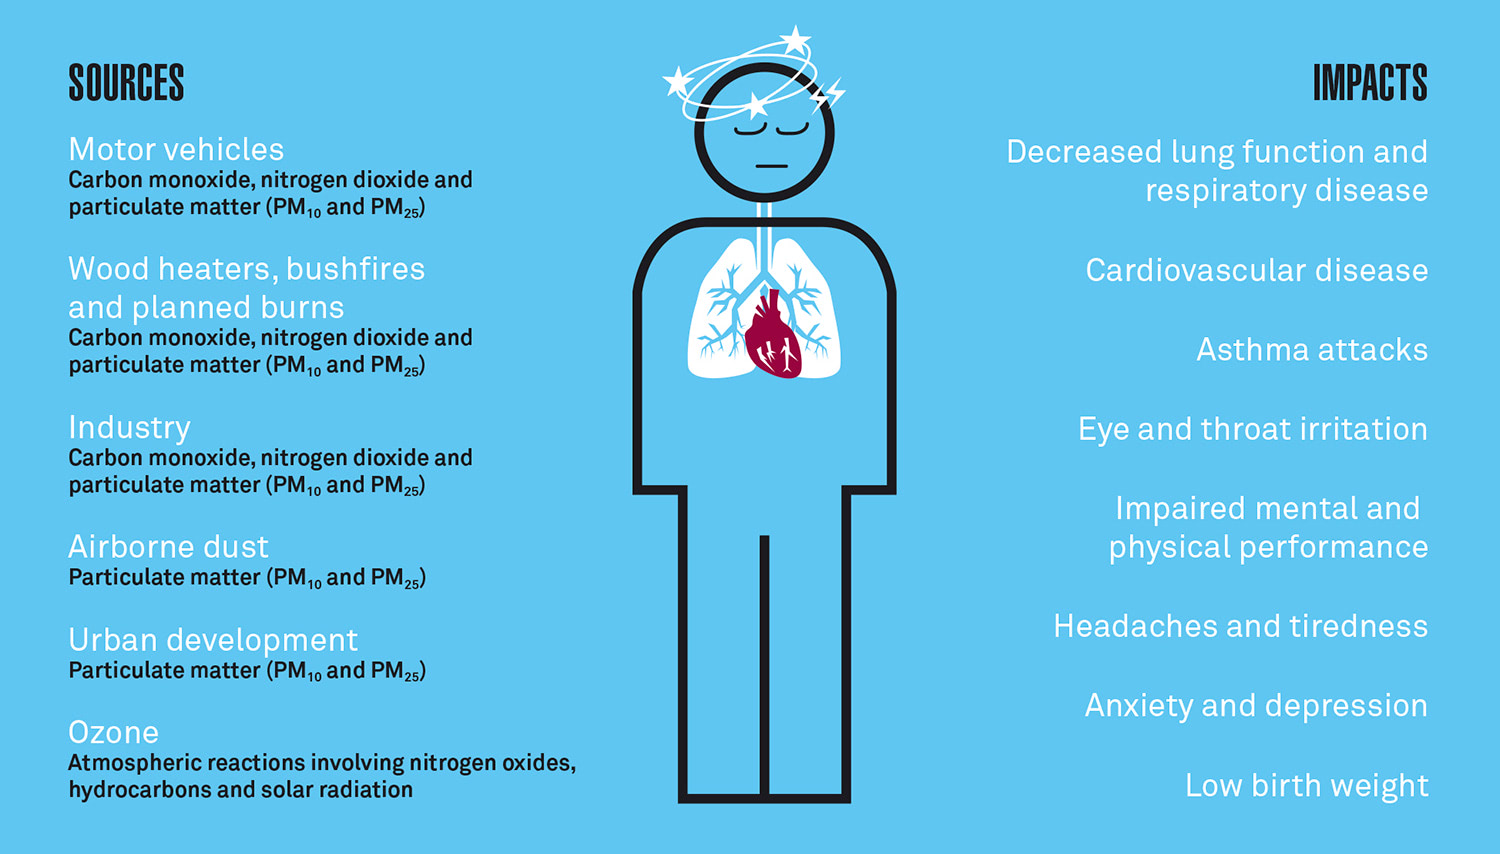 Figure A1: Sources of air pollution and impacts on human health